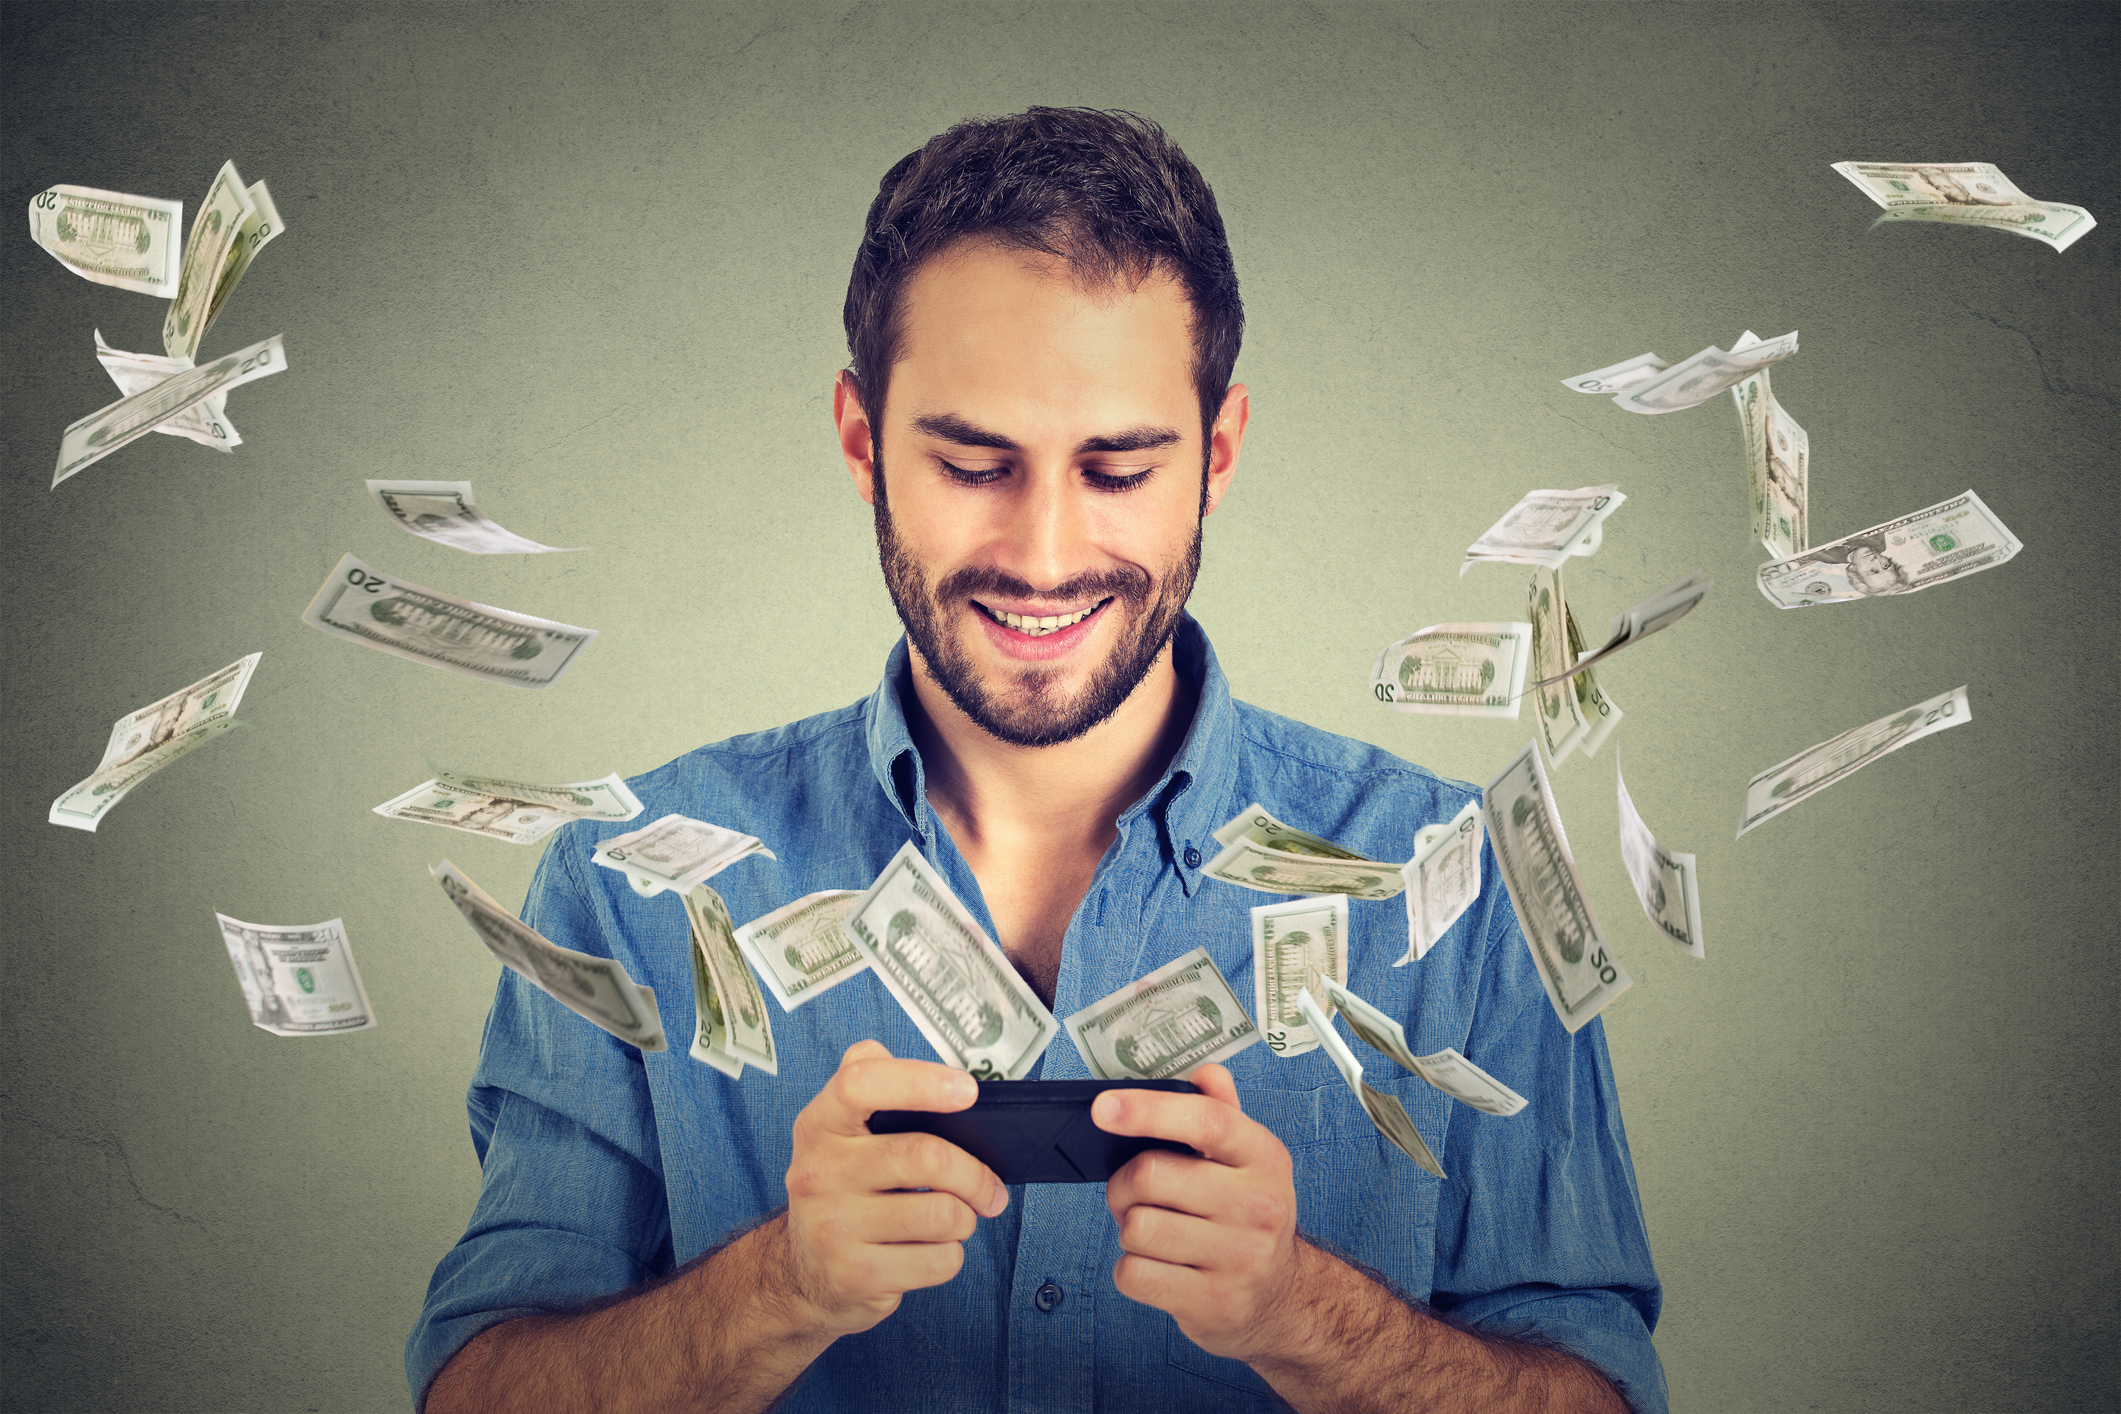 Image of guy wearing a blue shirt smiling while looking at his cell phone and money bills are flying around.